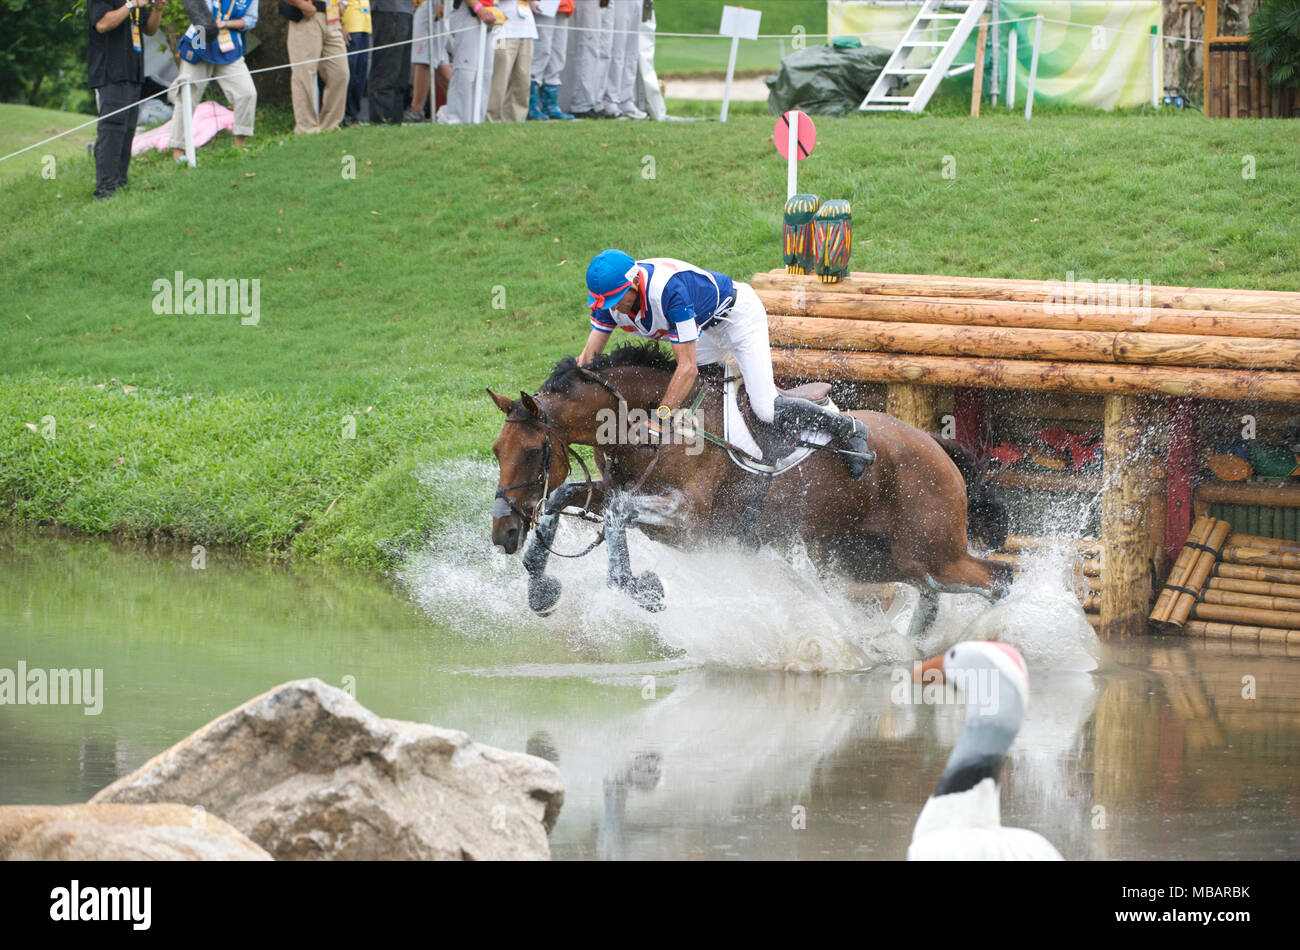 Olympic Games 2008, Hong Kong (Beijing Games) August 2008, Didier Dhennin (FRA) riding Ismene du Temple, eventing cross country Stock Photo